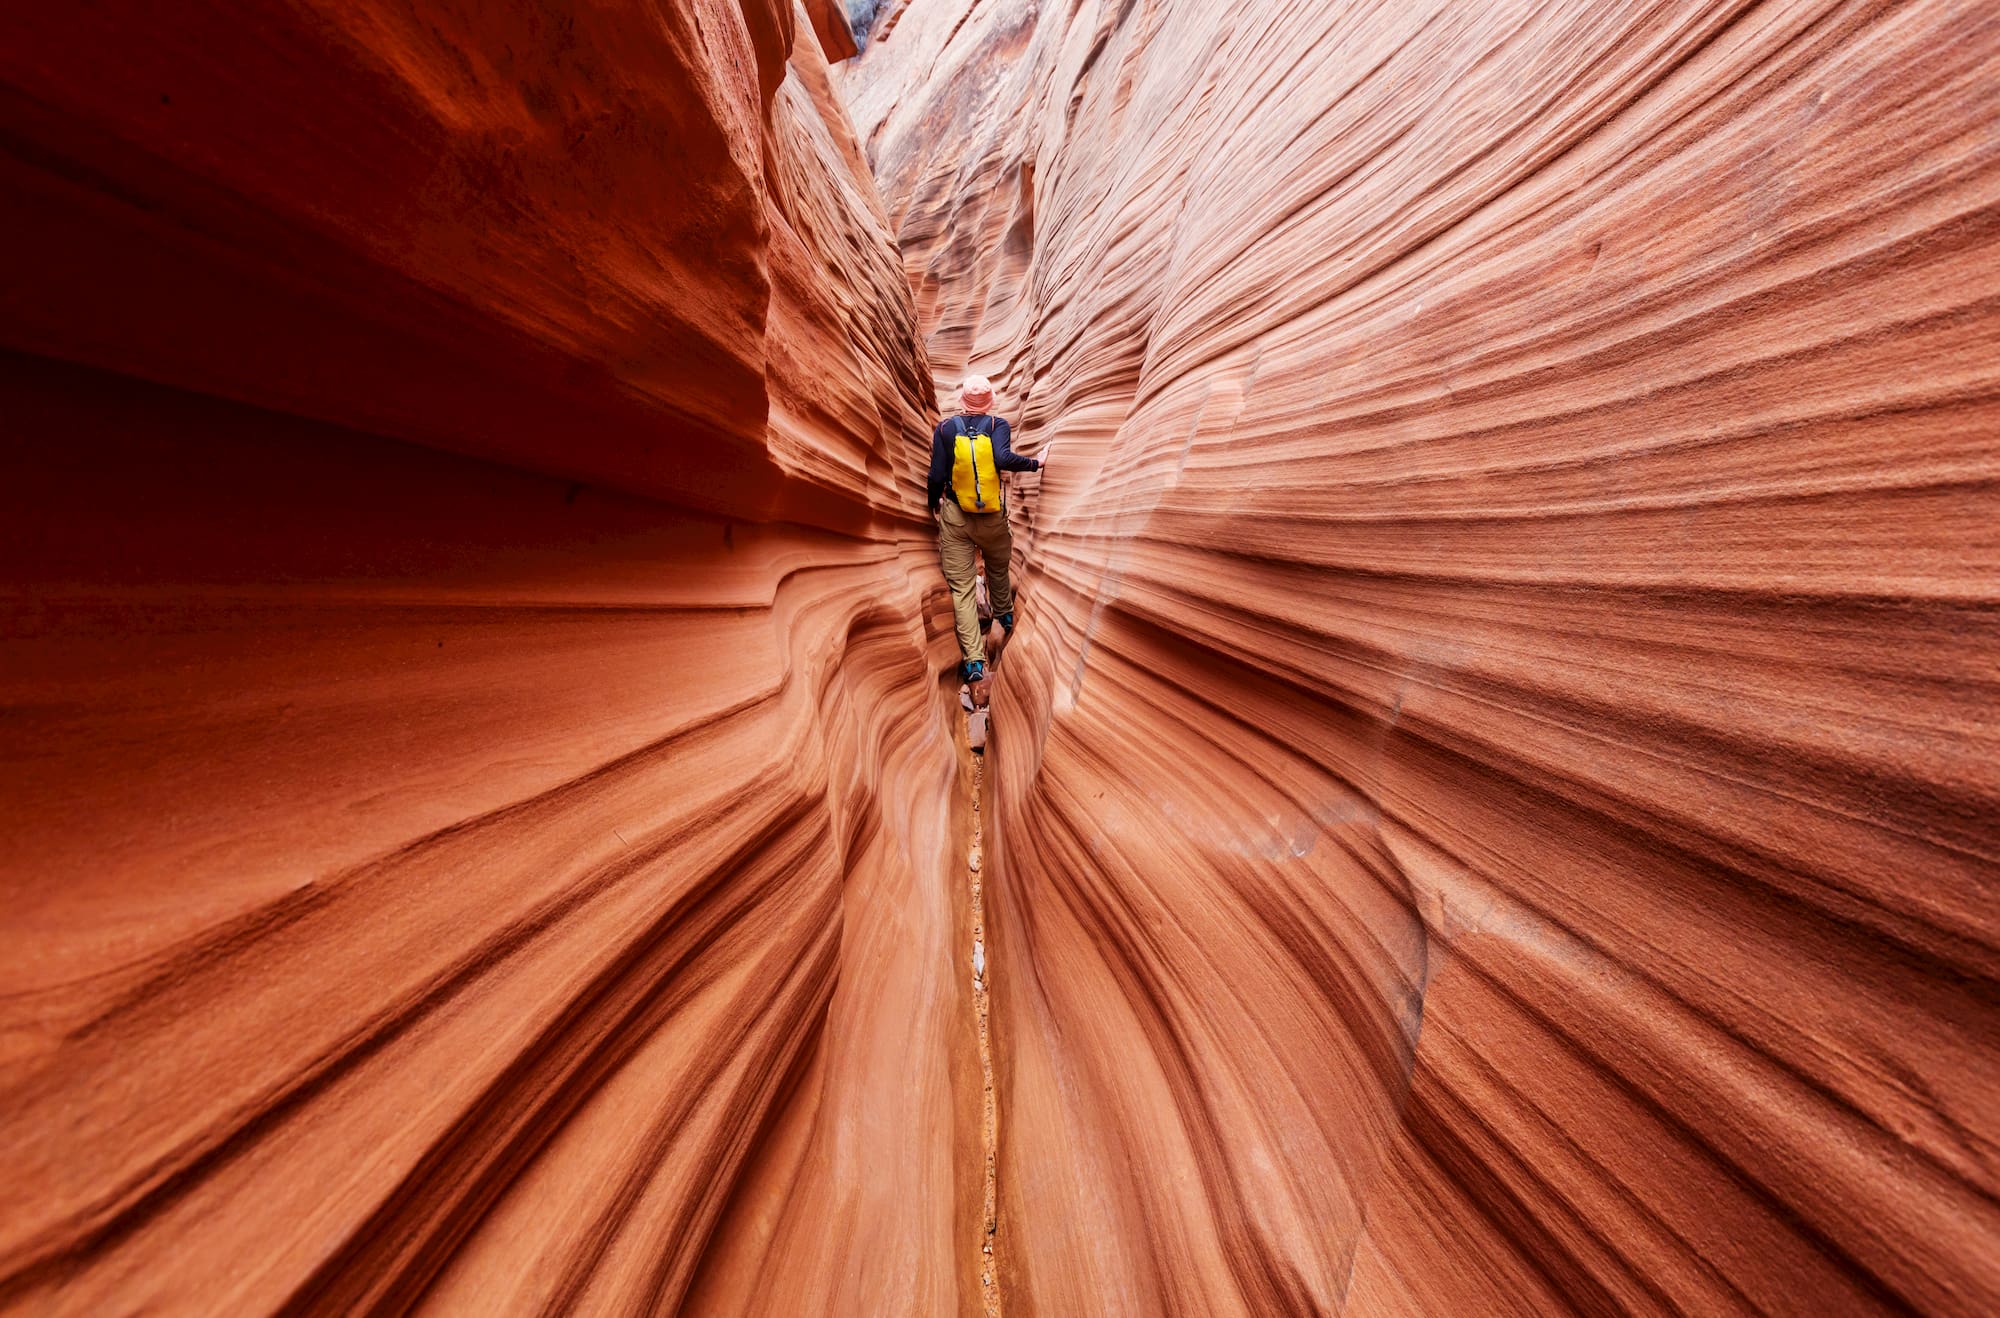 4/5/ · Buckskin Gulch—East of Kanab, UT.At 21 miles long, Buckskin Gulch holds the title as the longest navigated of the Utah slot canyons.Hikers can navigate the dark, winding narrows on a two-day backpacking trip, with a recommended miles on day one, and miles on day two.